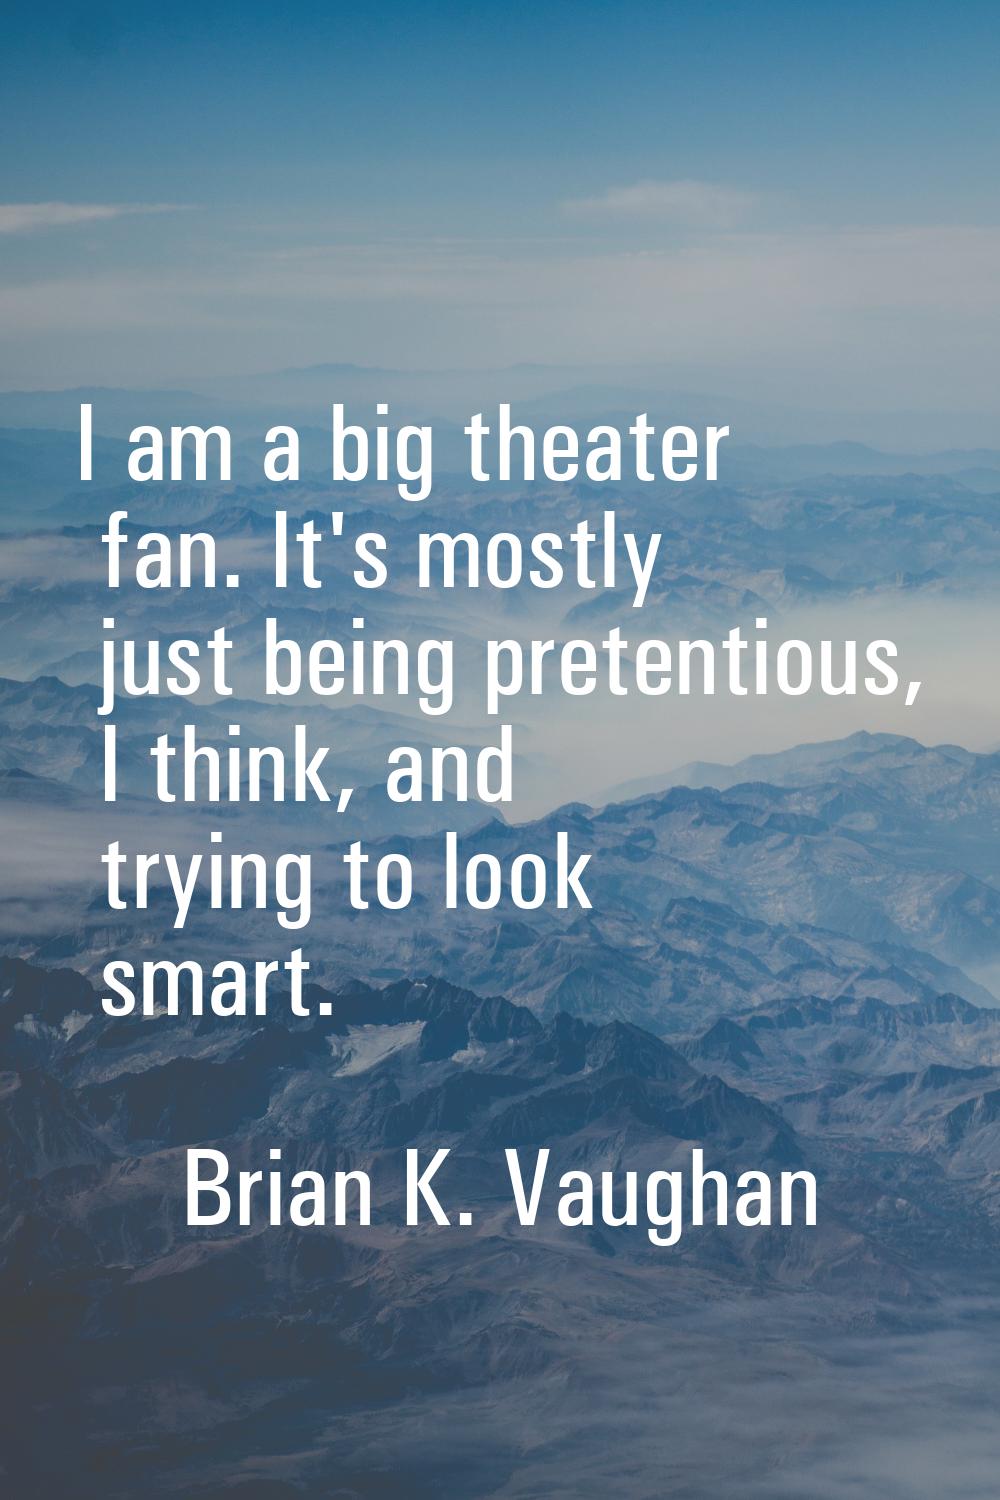 I am a big theater fan. It's mostly just being pretentious, I think, and trying to look smart.